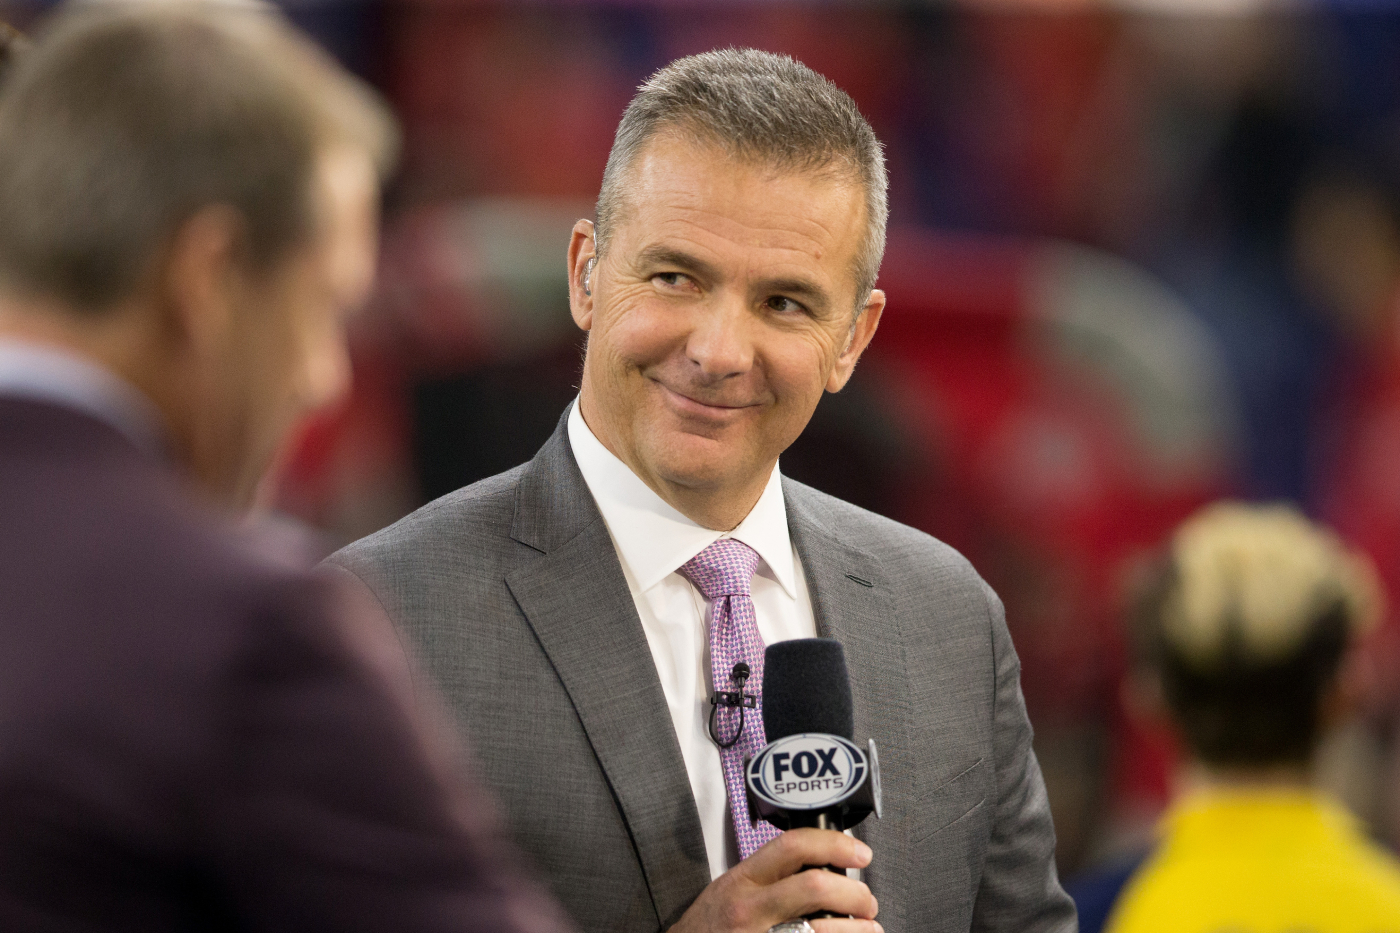 Urban Meyer has become a successful analyst on FOX after having success as a coach at Ohio State and Florida. Could he be done on TV, though?